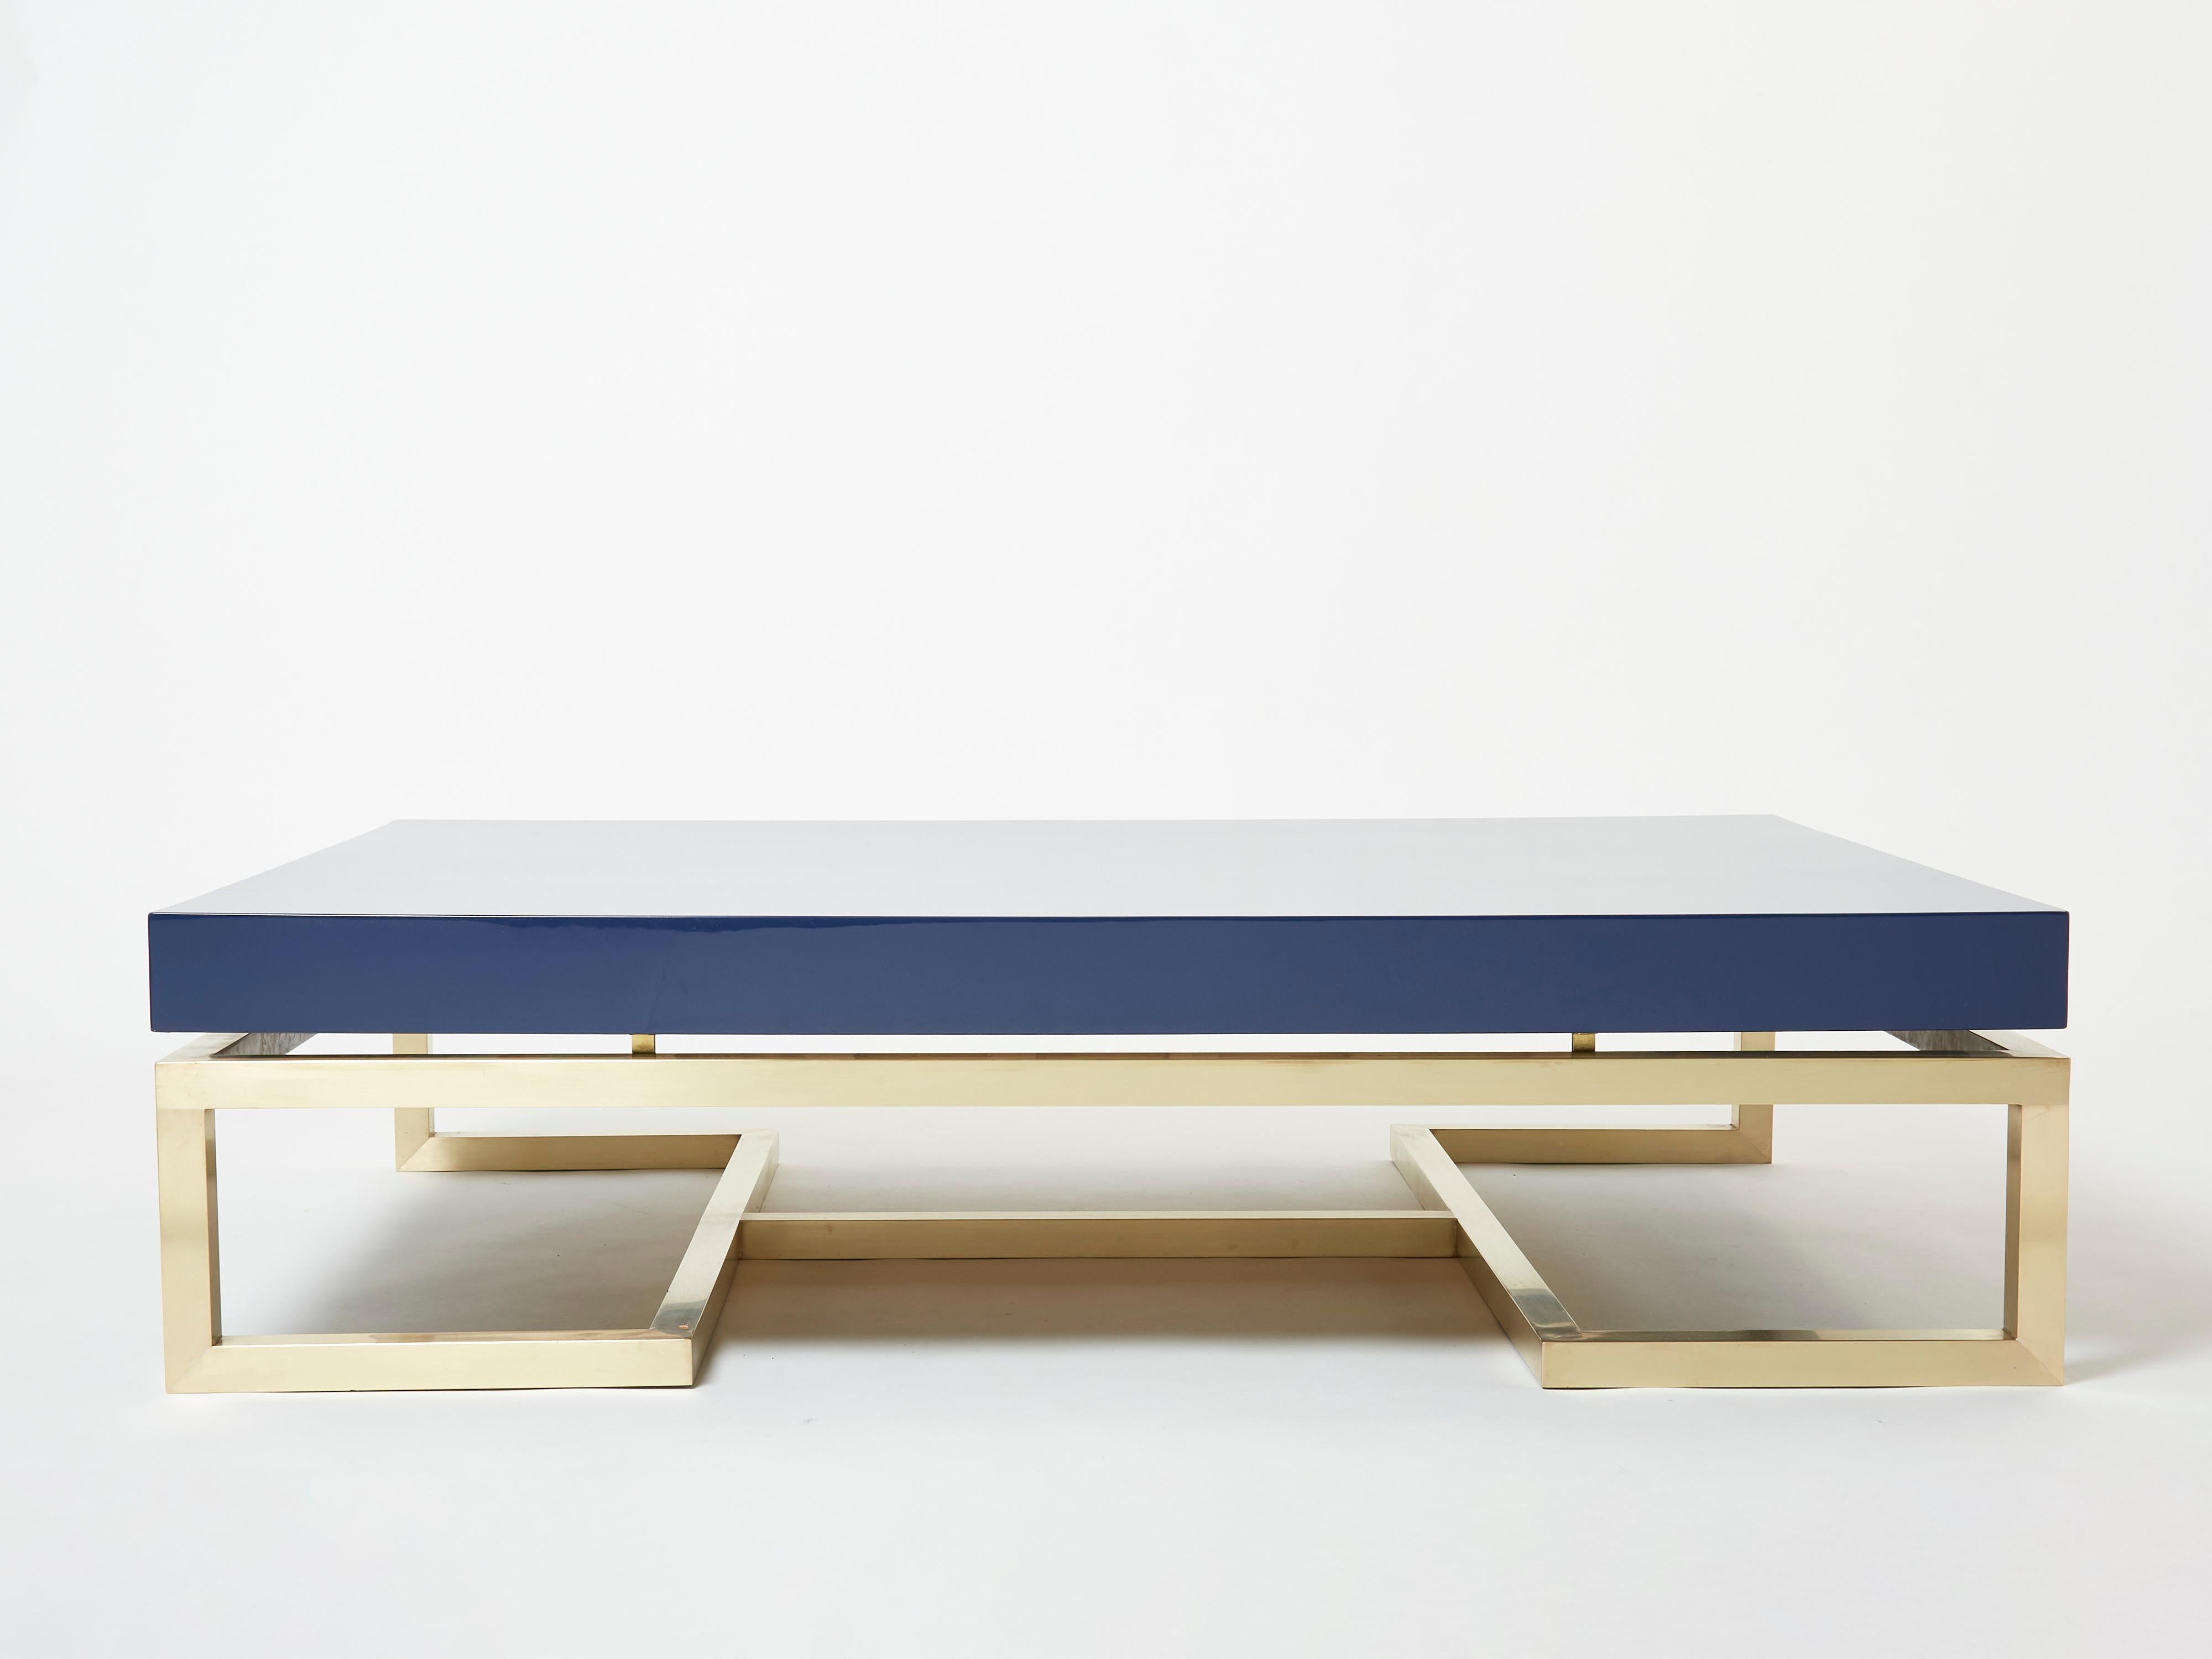 Designed by Guy Lefevre for Maison Jansen in the late 1970s, this beautiful coffee table features strong silky brass legs, with a dark ocean blue lacquered top. Its symmetry and strong architectural design combine to create a nice 1970s feel. It